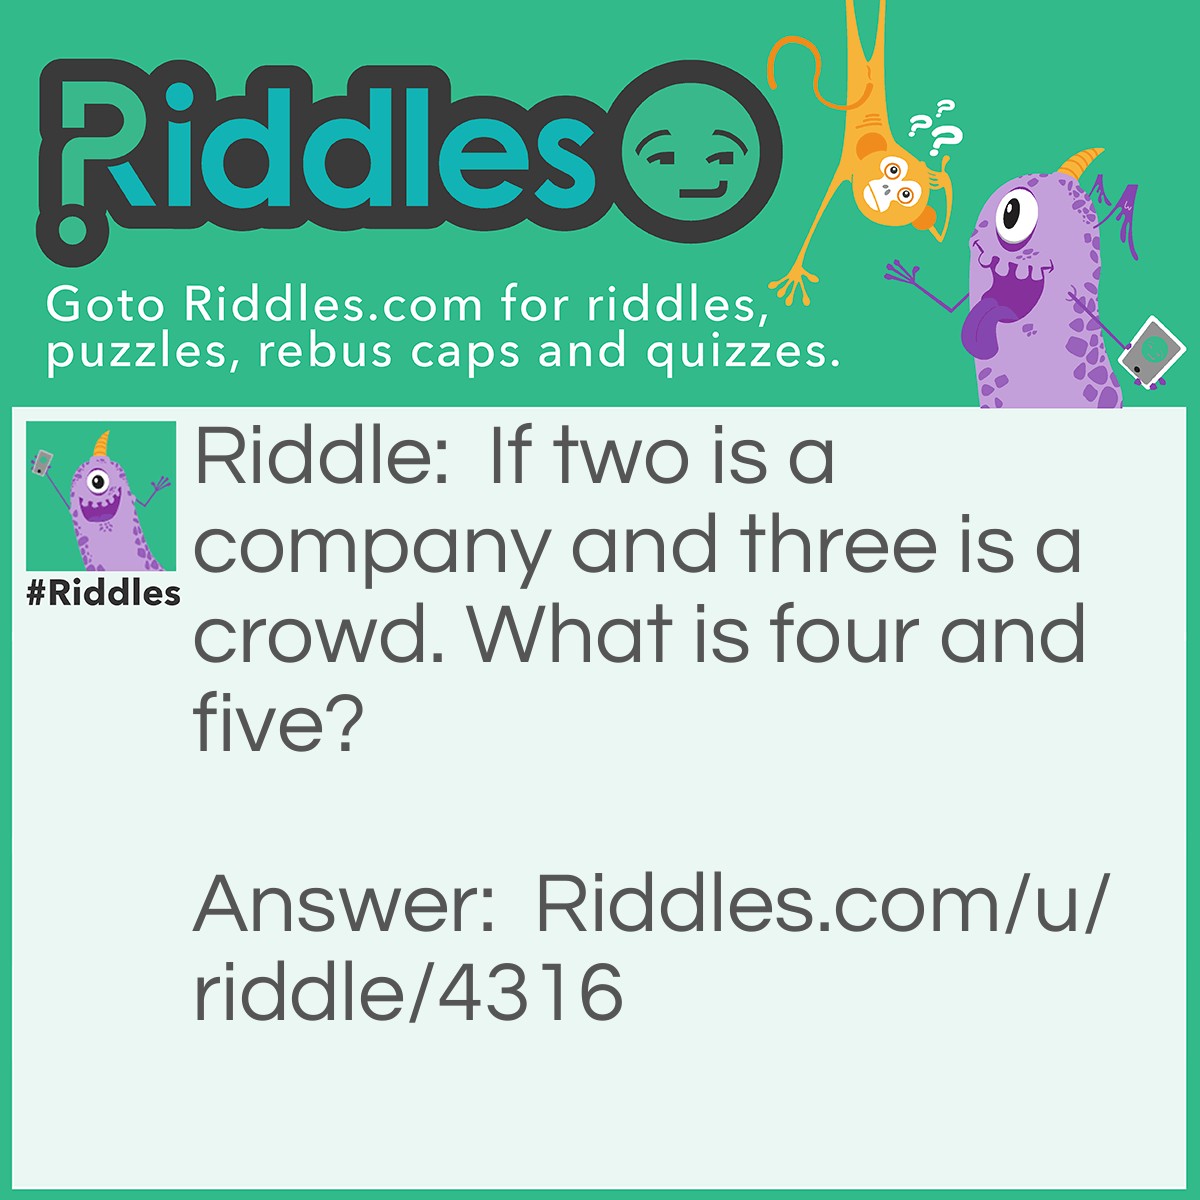 Riddle: If two is a company and three is a crowd. What is four and five? Answer: Nine.